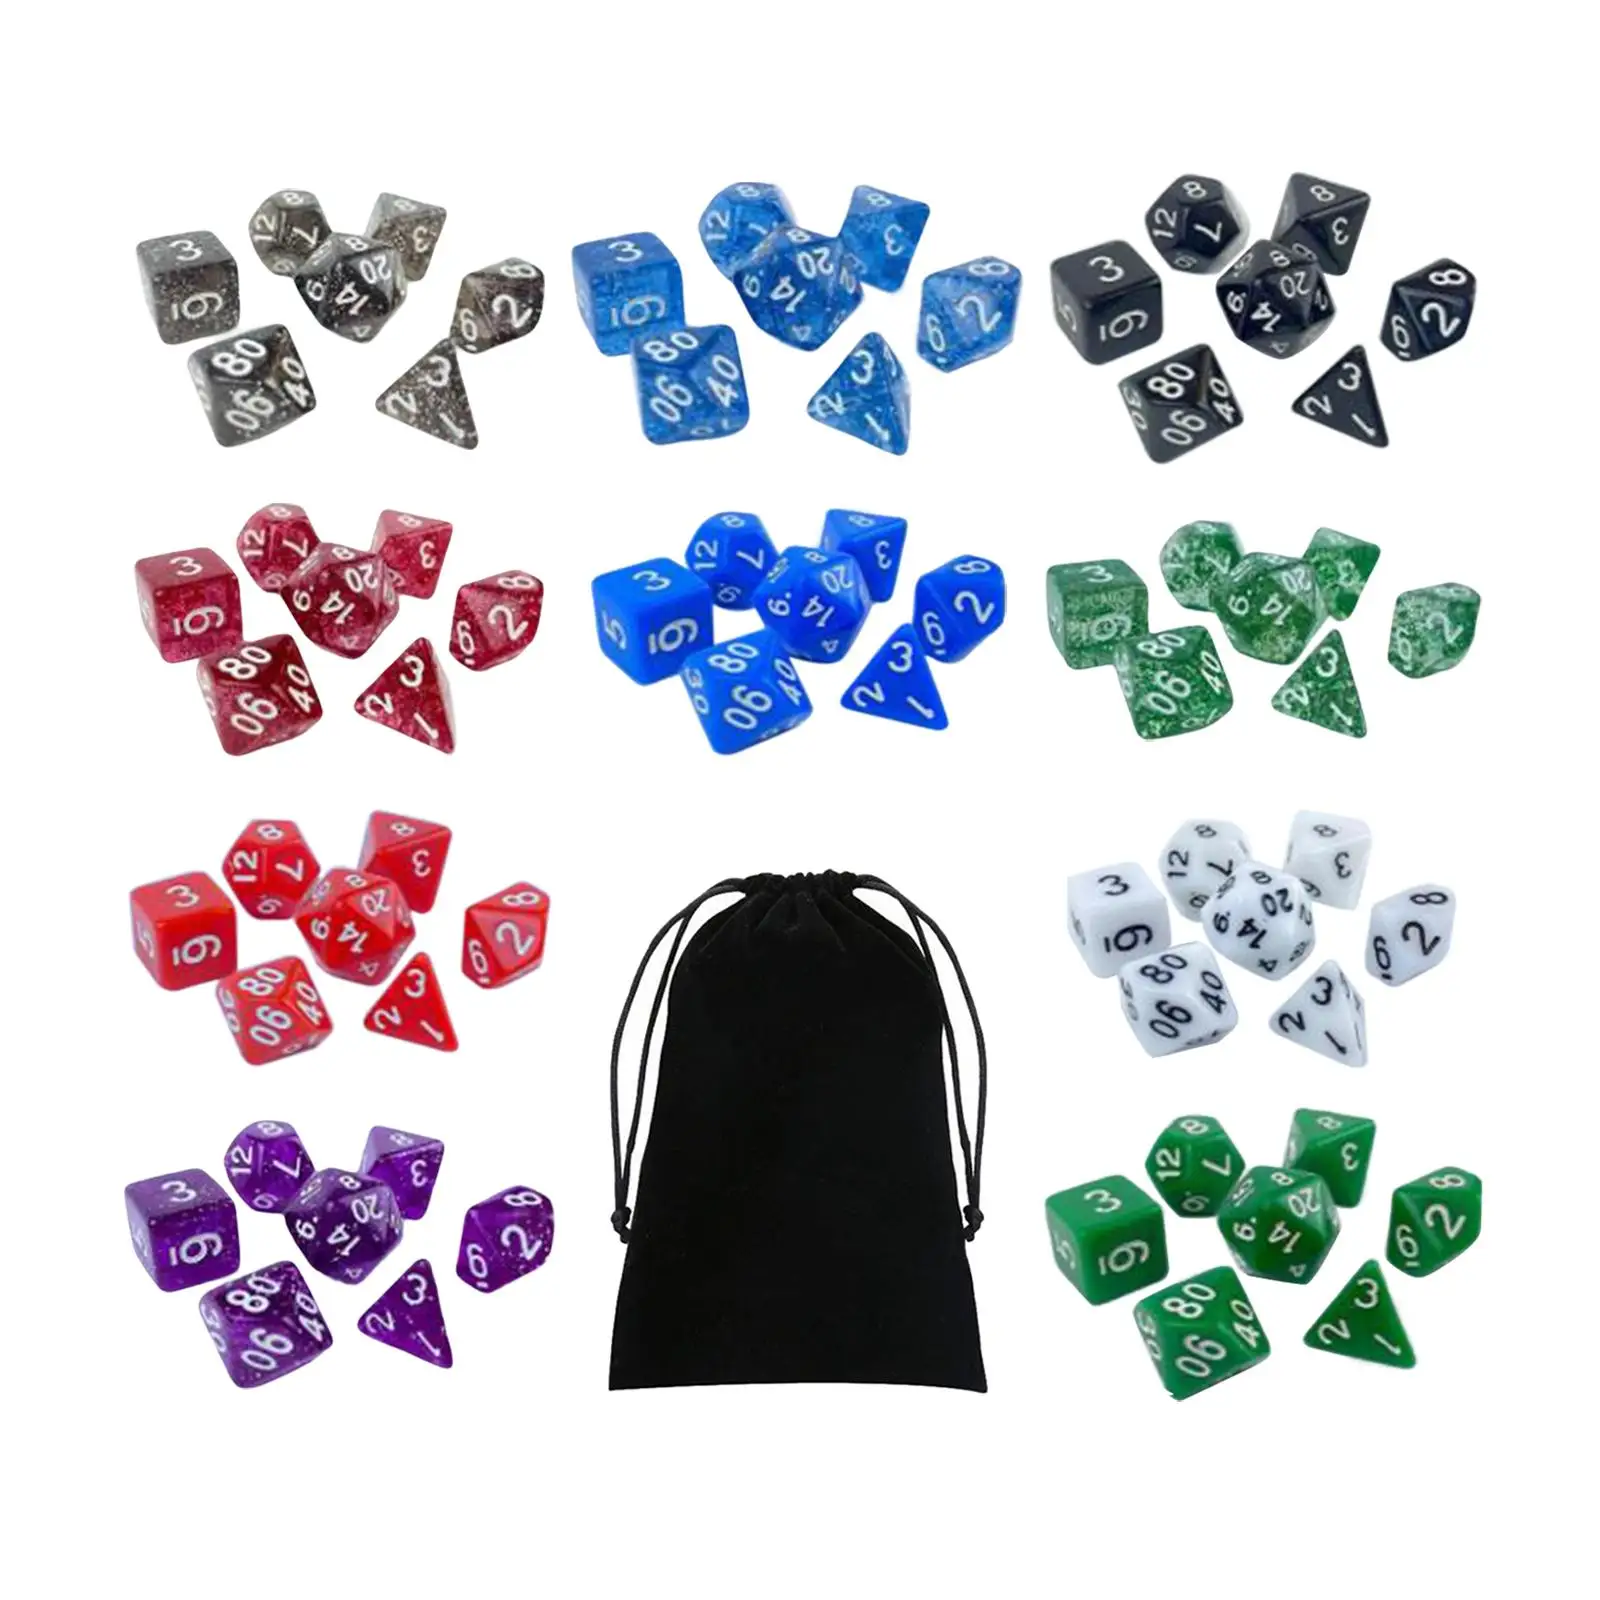 70Pcs Acrylic Polyhedral Dice Set Entertainment Toy Game Props with Storage Bag Dice Dice Sets for D10 D6 D20 D4 D8